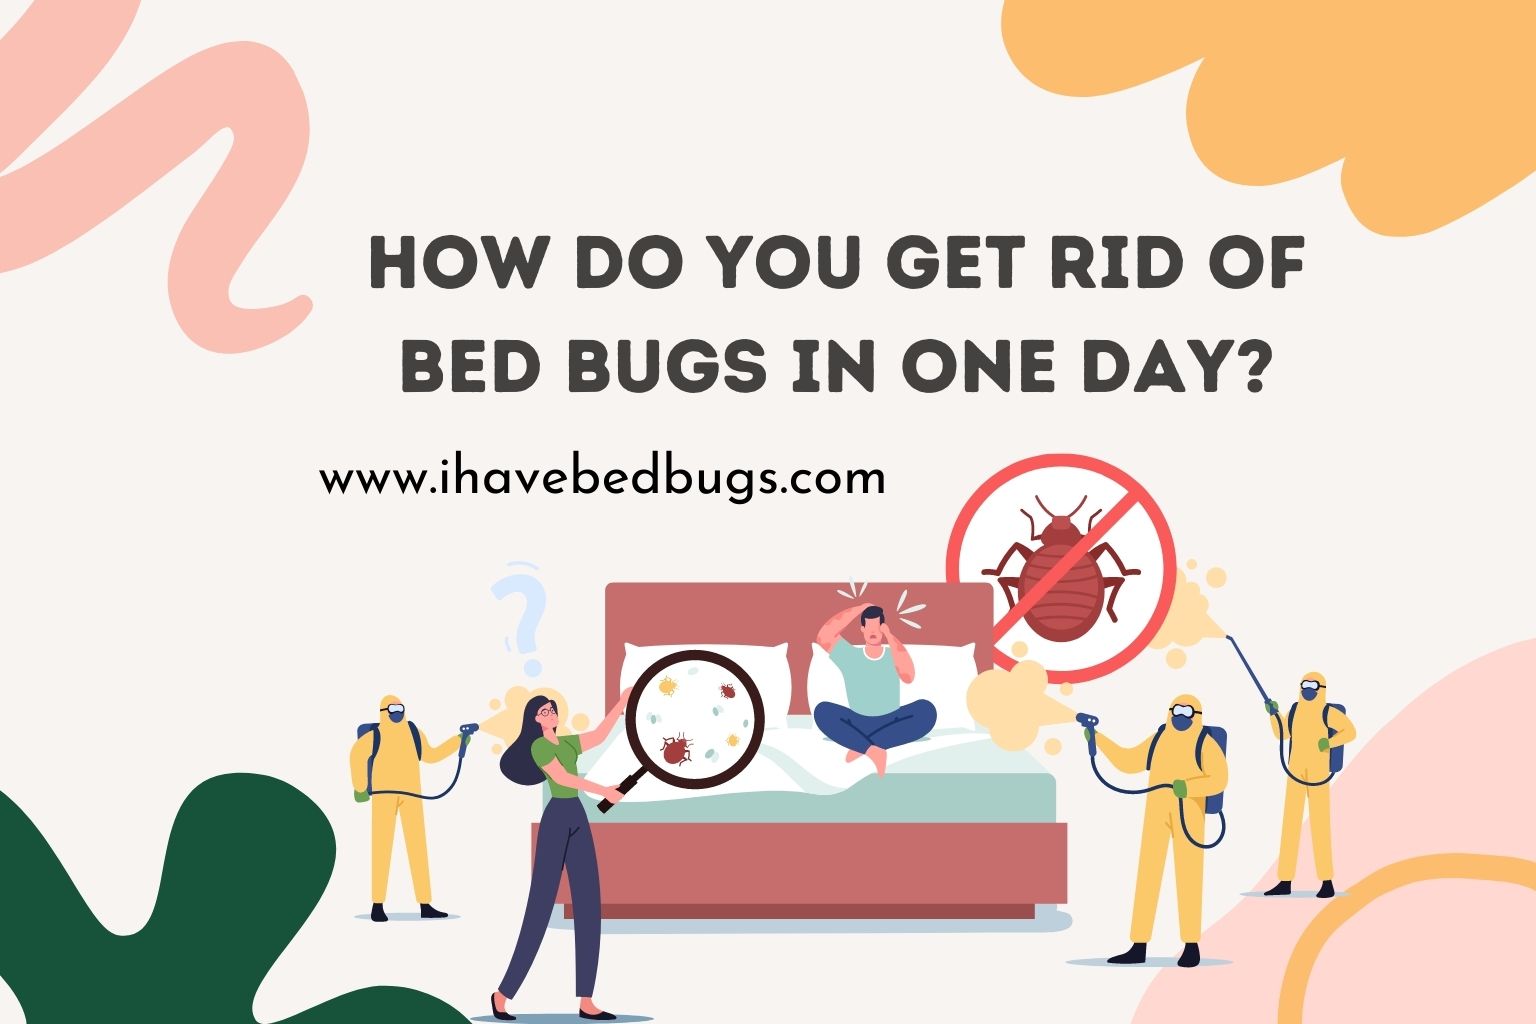 How do you get rid of bed bugs in one day